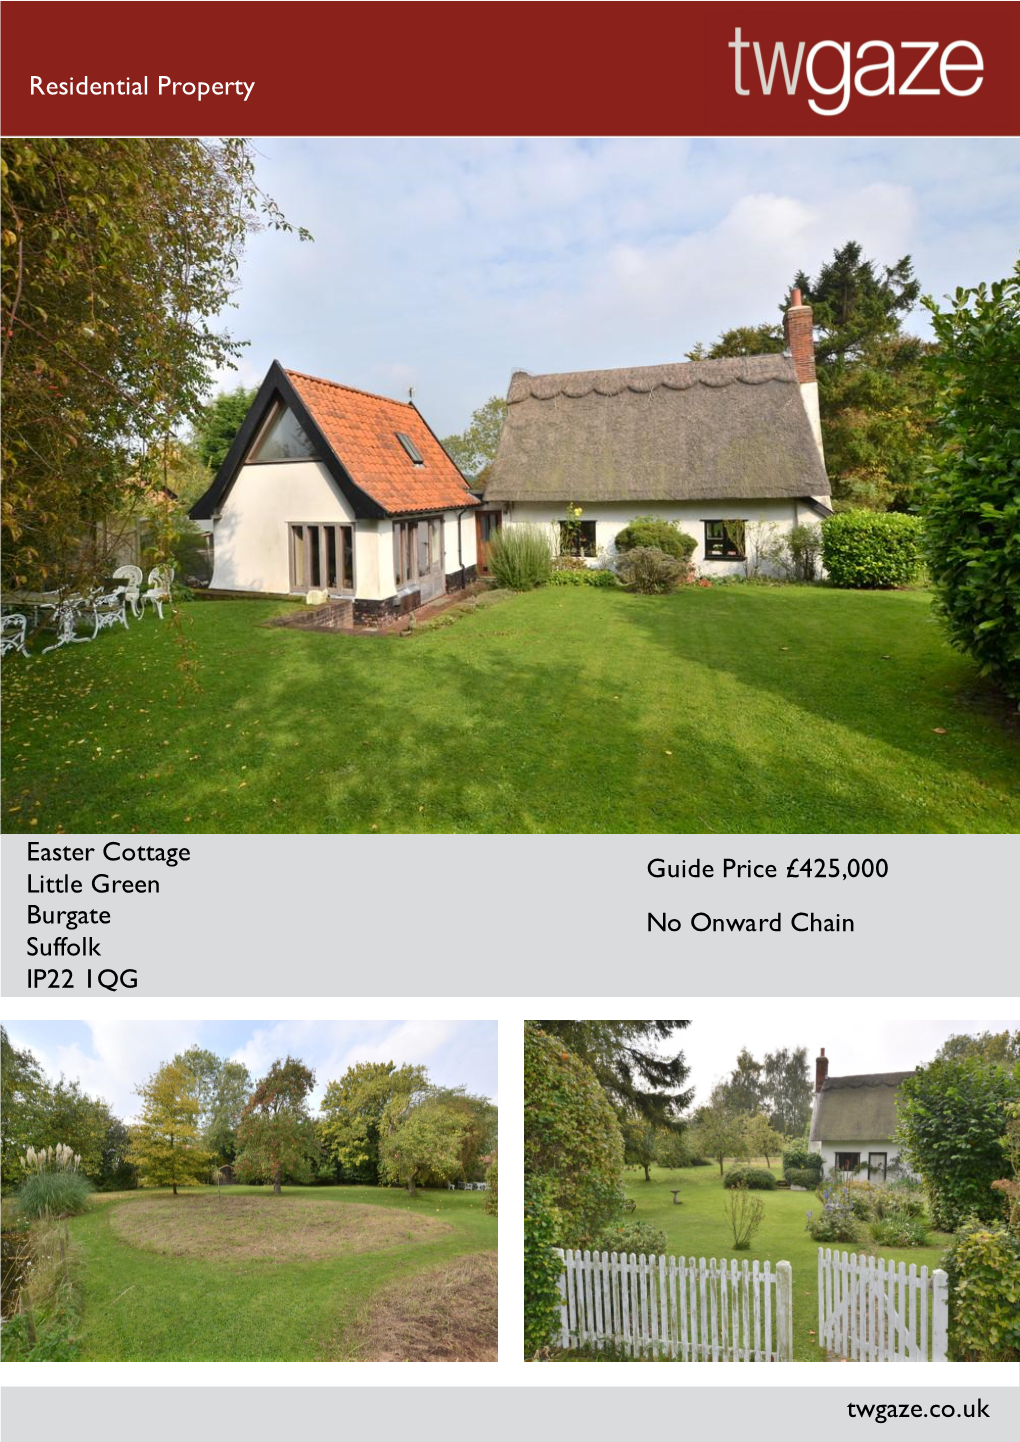 Easter Cottage Little Green Burgate Suffolk IP22 1QG Guide Price £425000 No Onward Chain Twgaze.Co.Uk